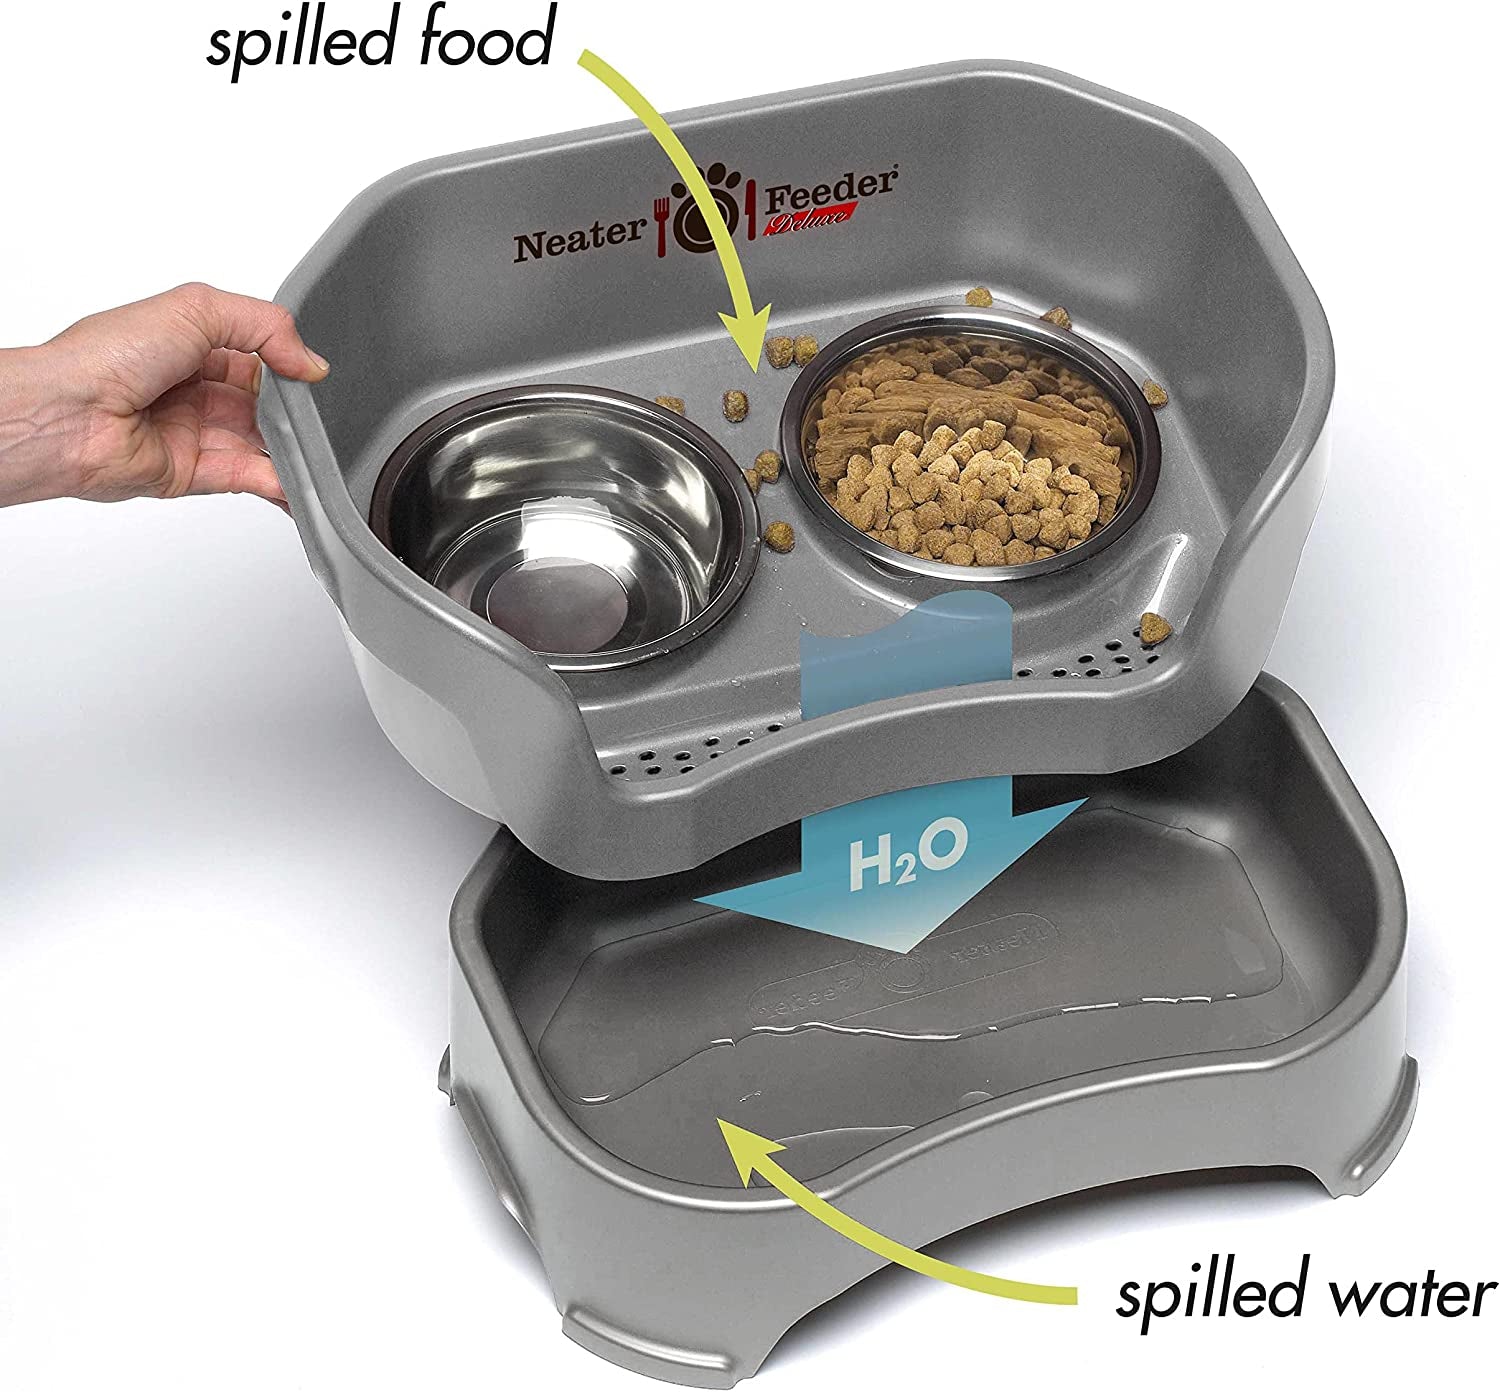 Neater Feeder Deluxe with Leg Extensions for Small Dogs - Mess Proof Pet Feeder with Stainless Steel Food & Water Bowls - Drip Proof, Non-Tip, and Non-Slip - Gunmetal Grey